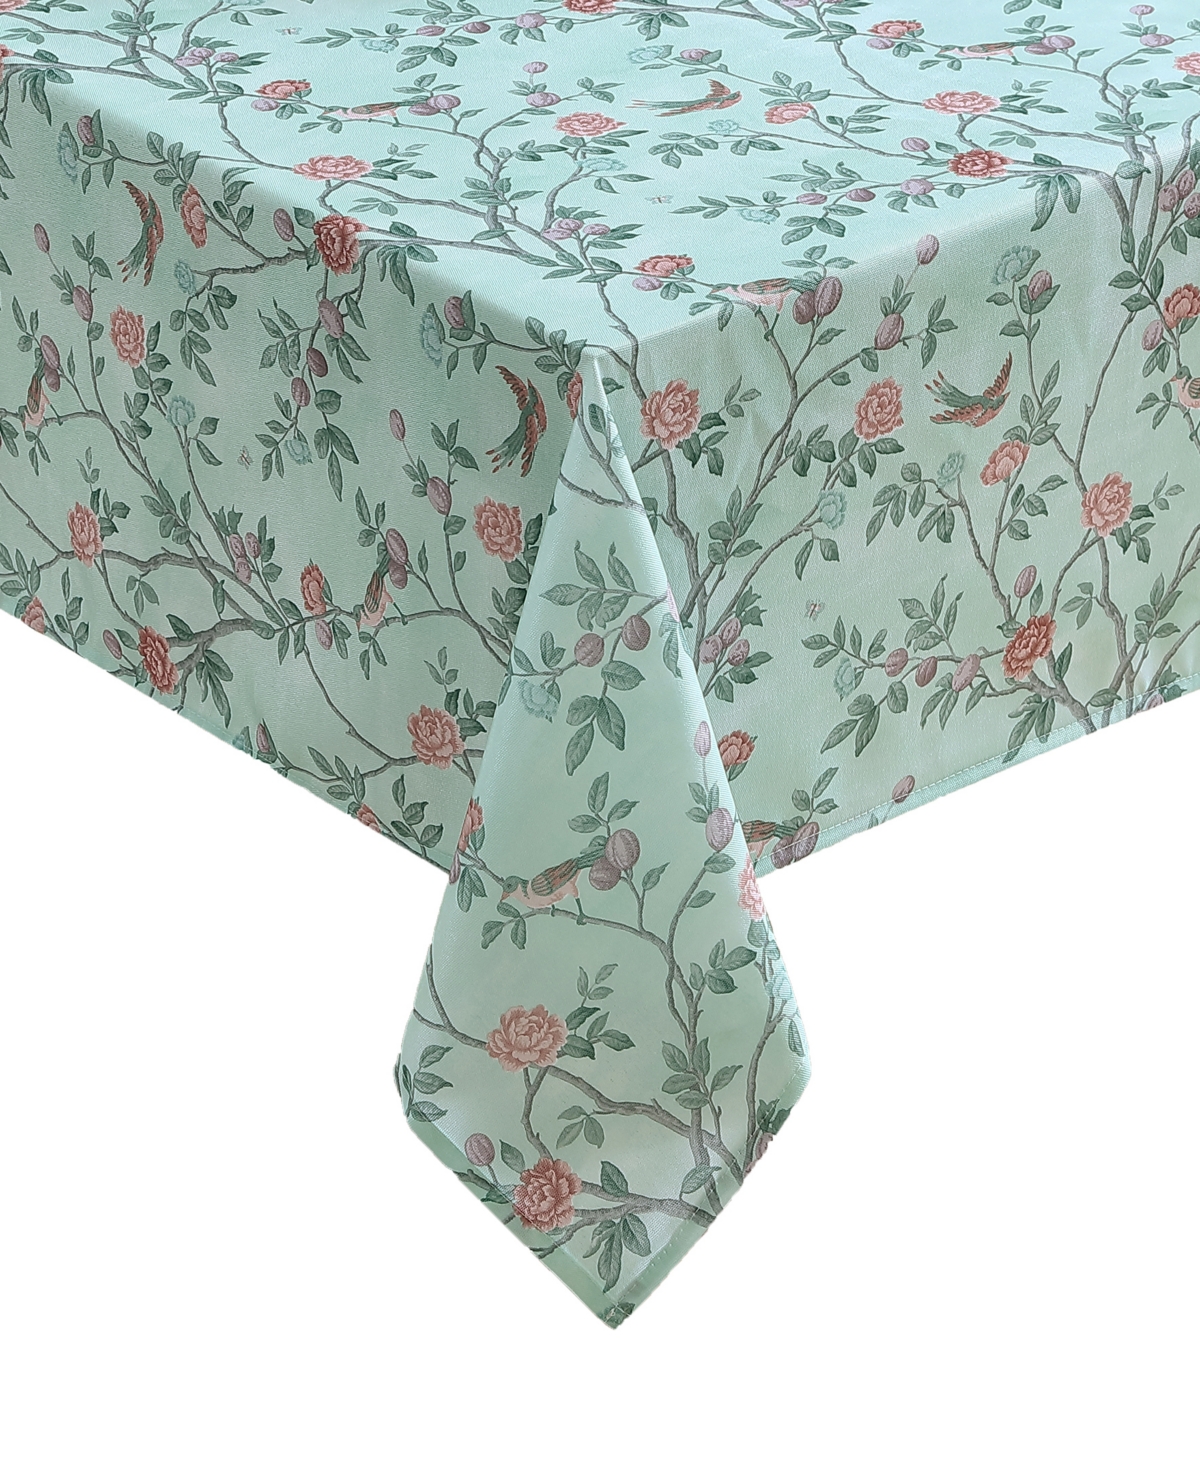 Laura Ashley Easy Care Tablecloth, 60" X 84", Service For 6 In Eglantine